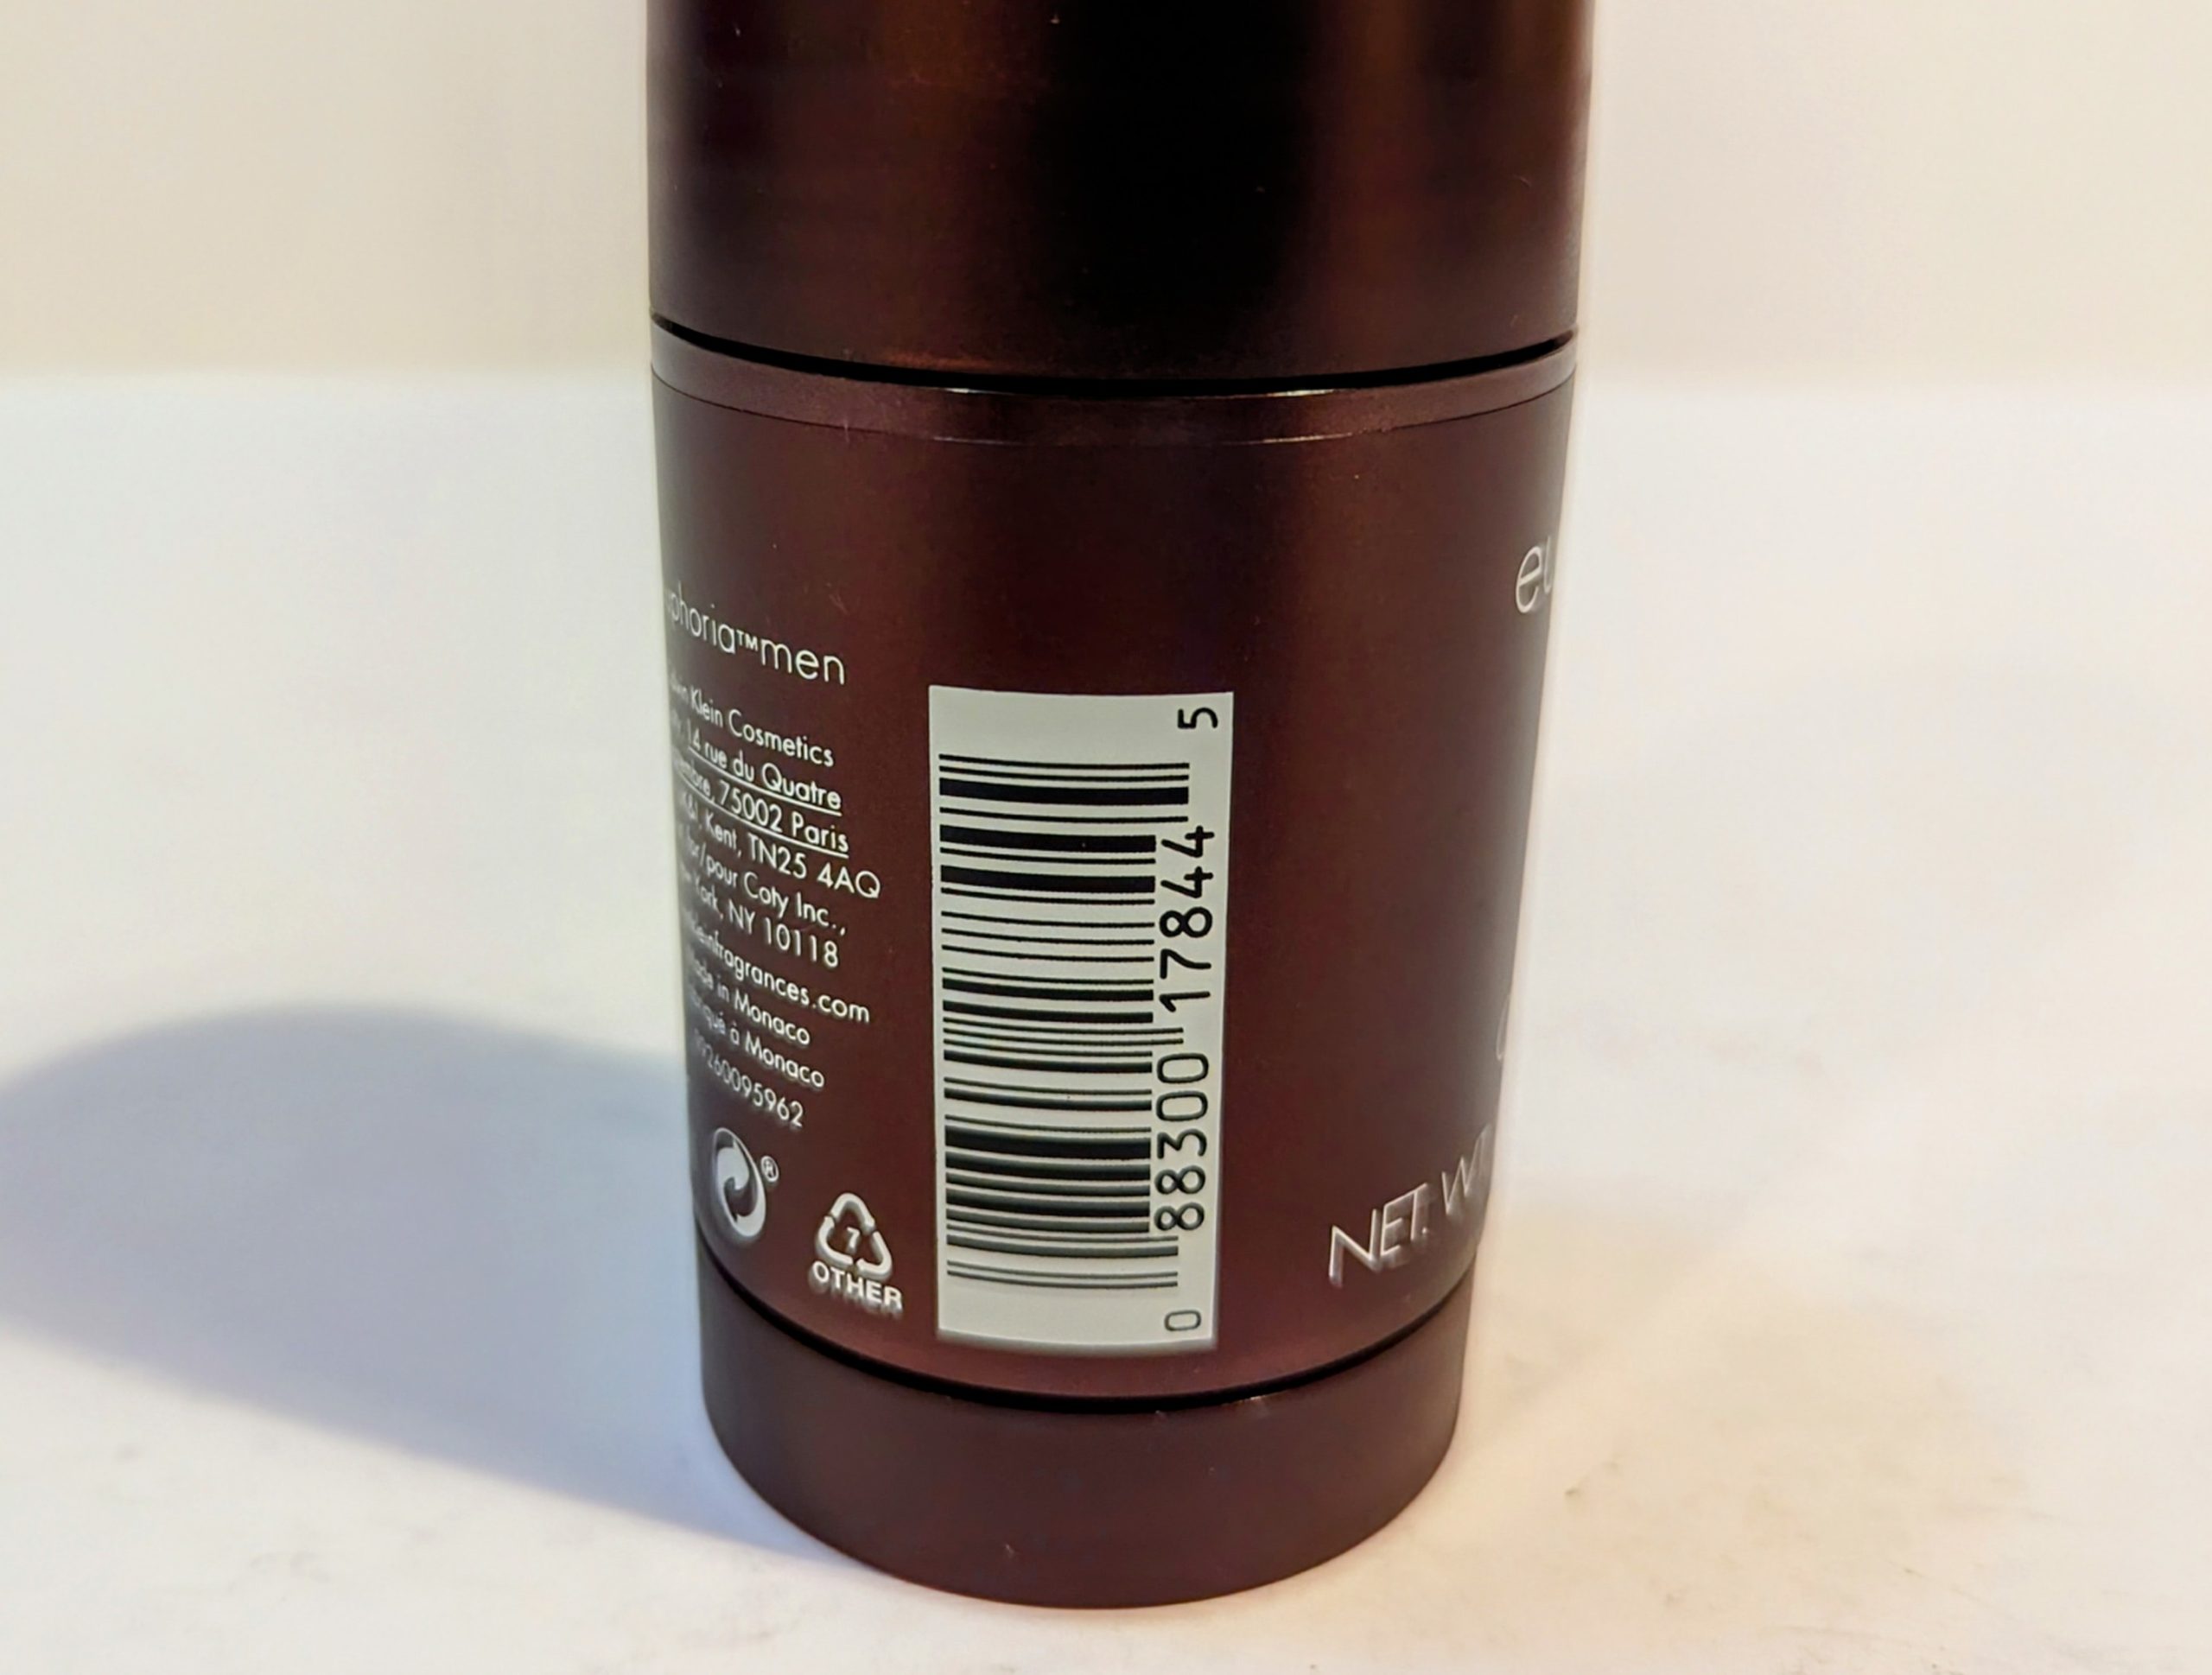 A close-up of the back of a cylindrical deodorant container displaying a barcode, recycling symbols, small text, and the phrase “NET WT 3.0 OZ.” The container is metallic brown.